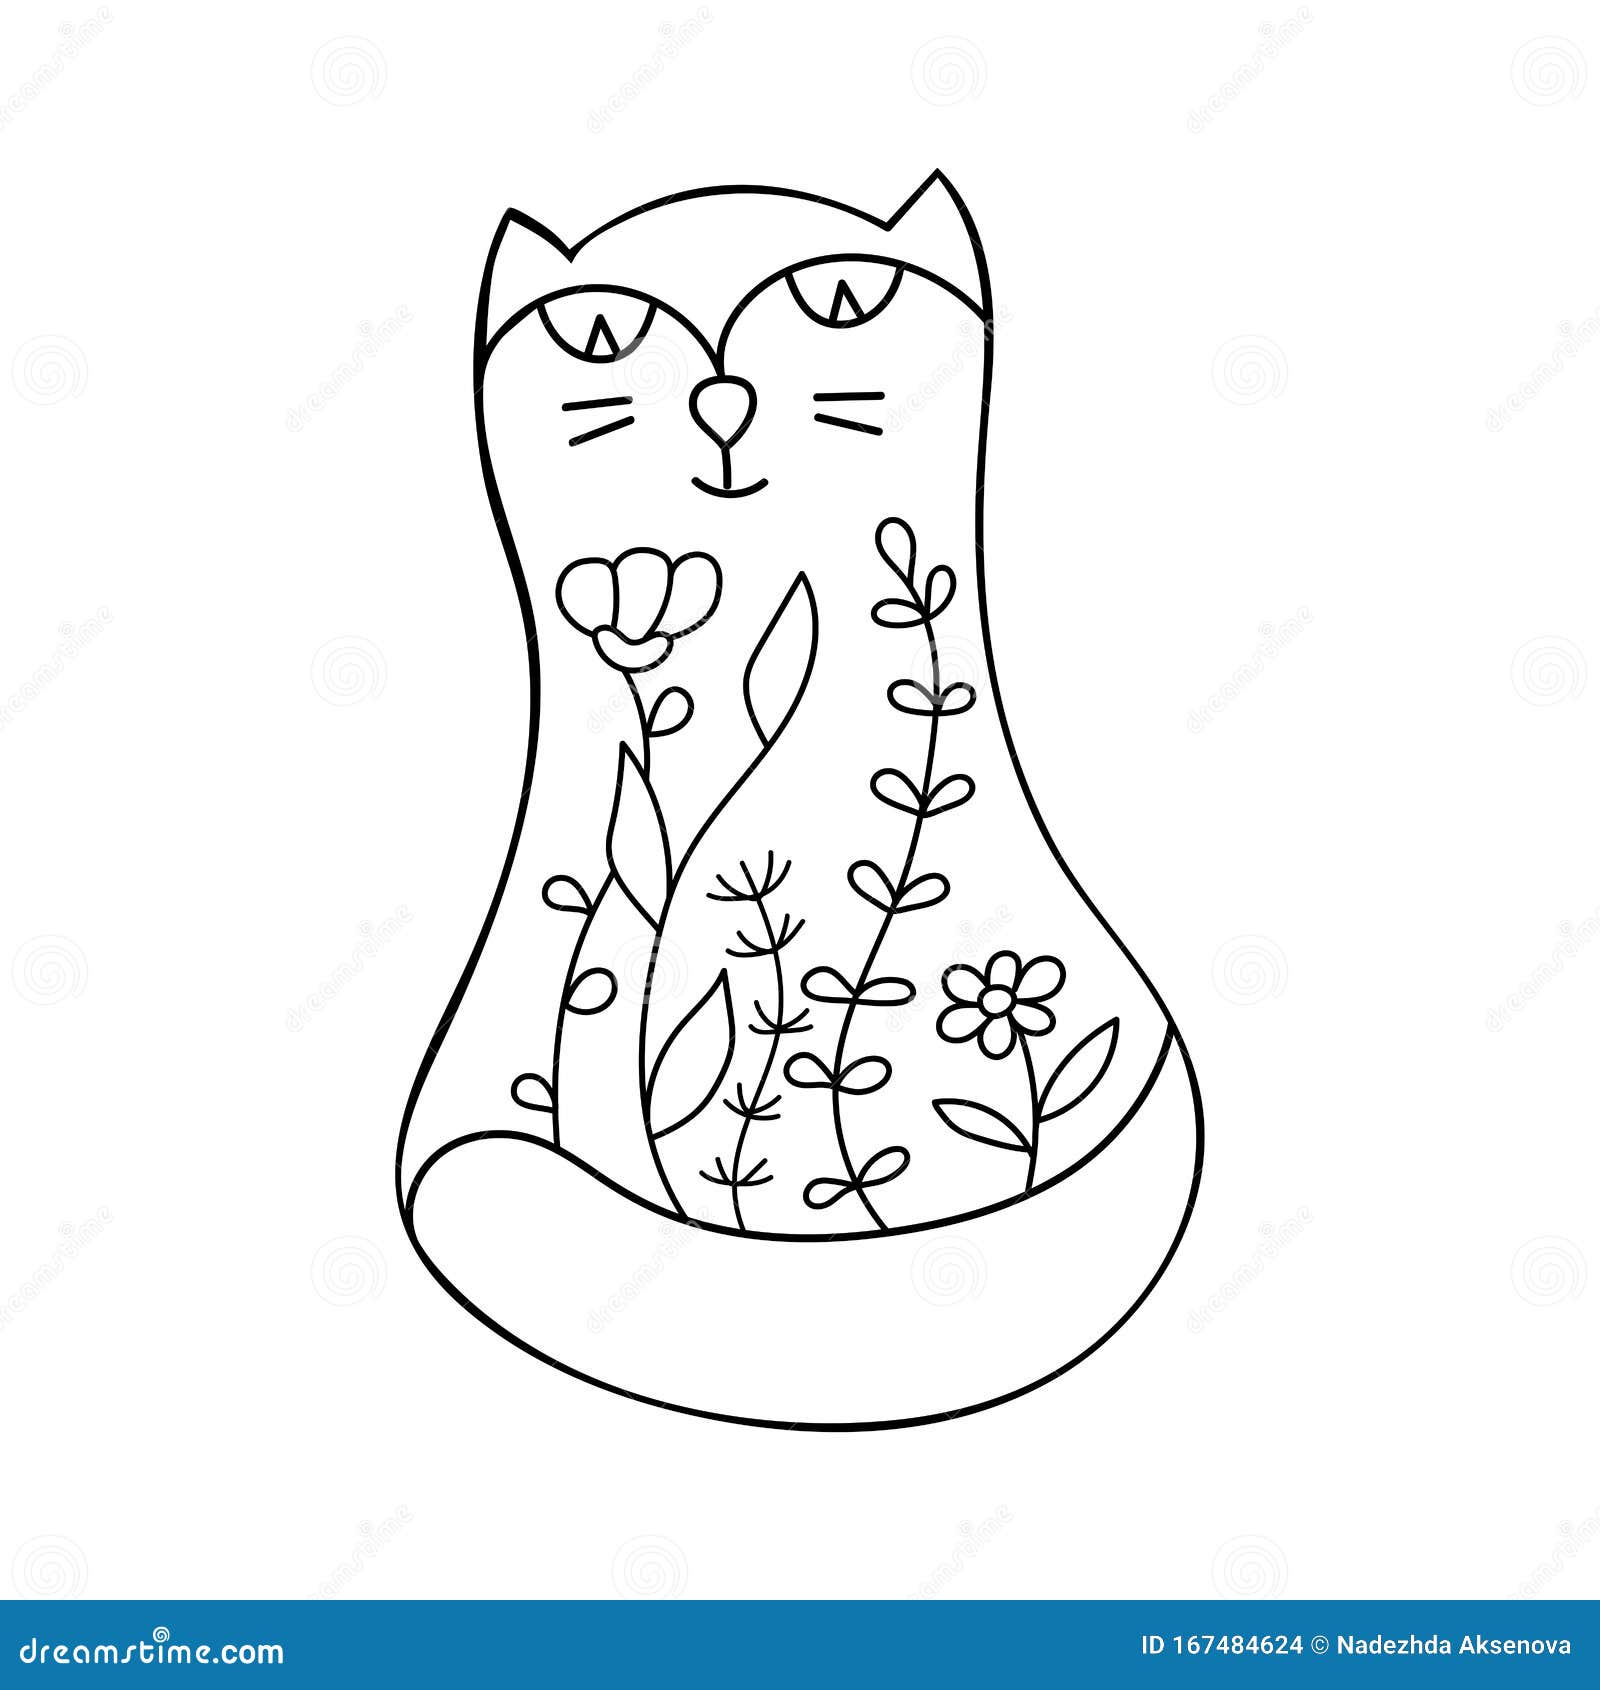 Cute Cat And Flowers. Doodle Style. Coloring Book, Page For Adults And